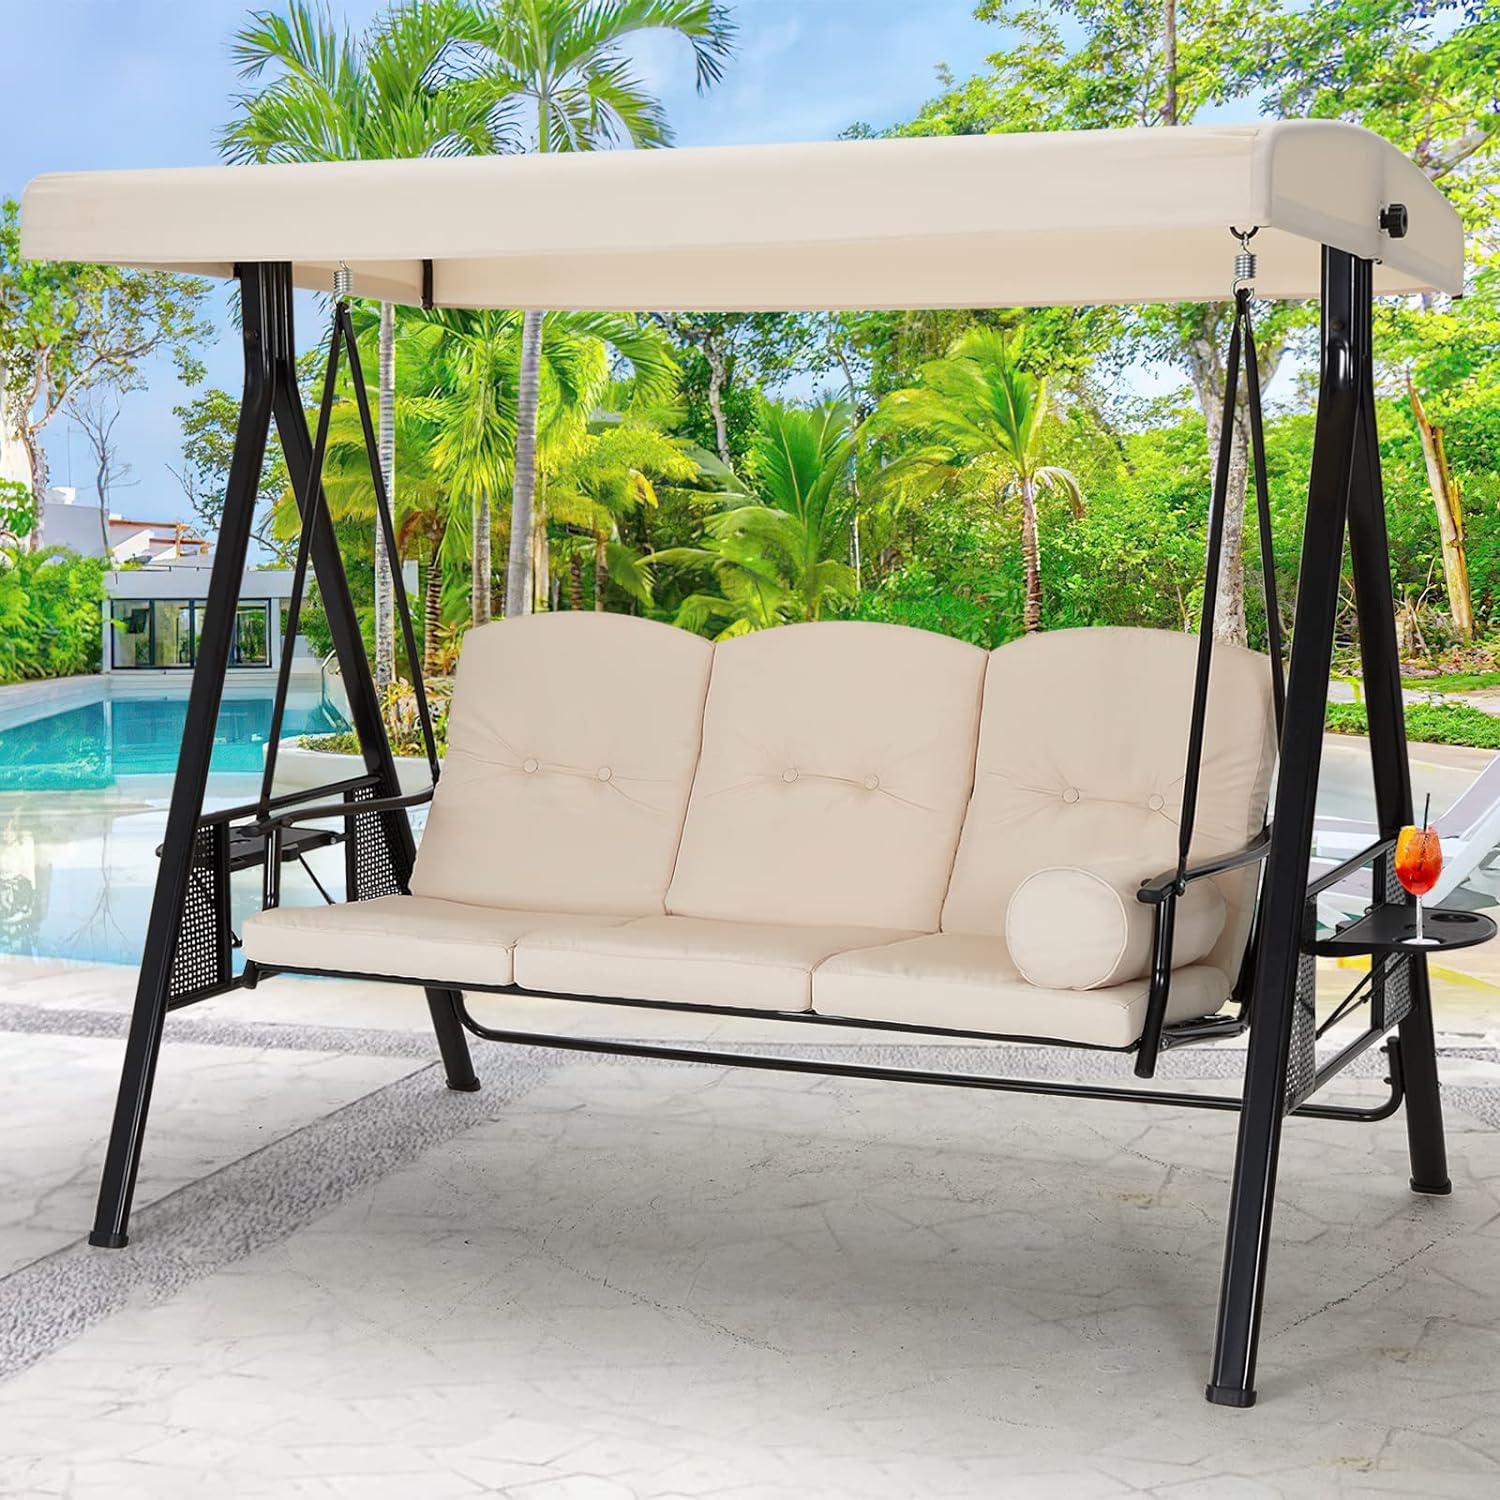 AECOJOY 3-Seat Porch Swing Chair, Patio Swing Chair with Stand and Removable Cushions, Outdoor Canopy Swing Chair for Outside, Backyard, Garden(Beige Cushion&Steel Frame)